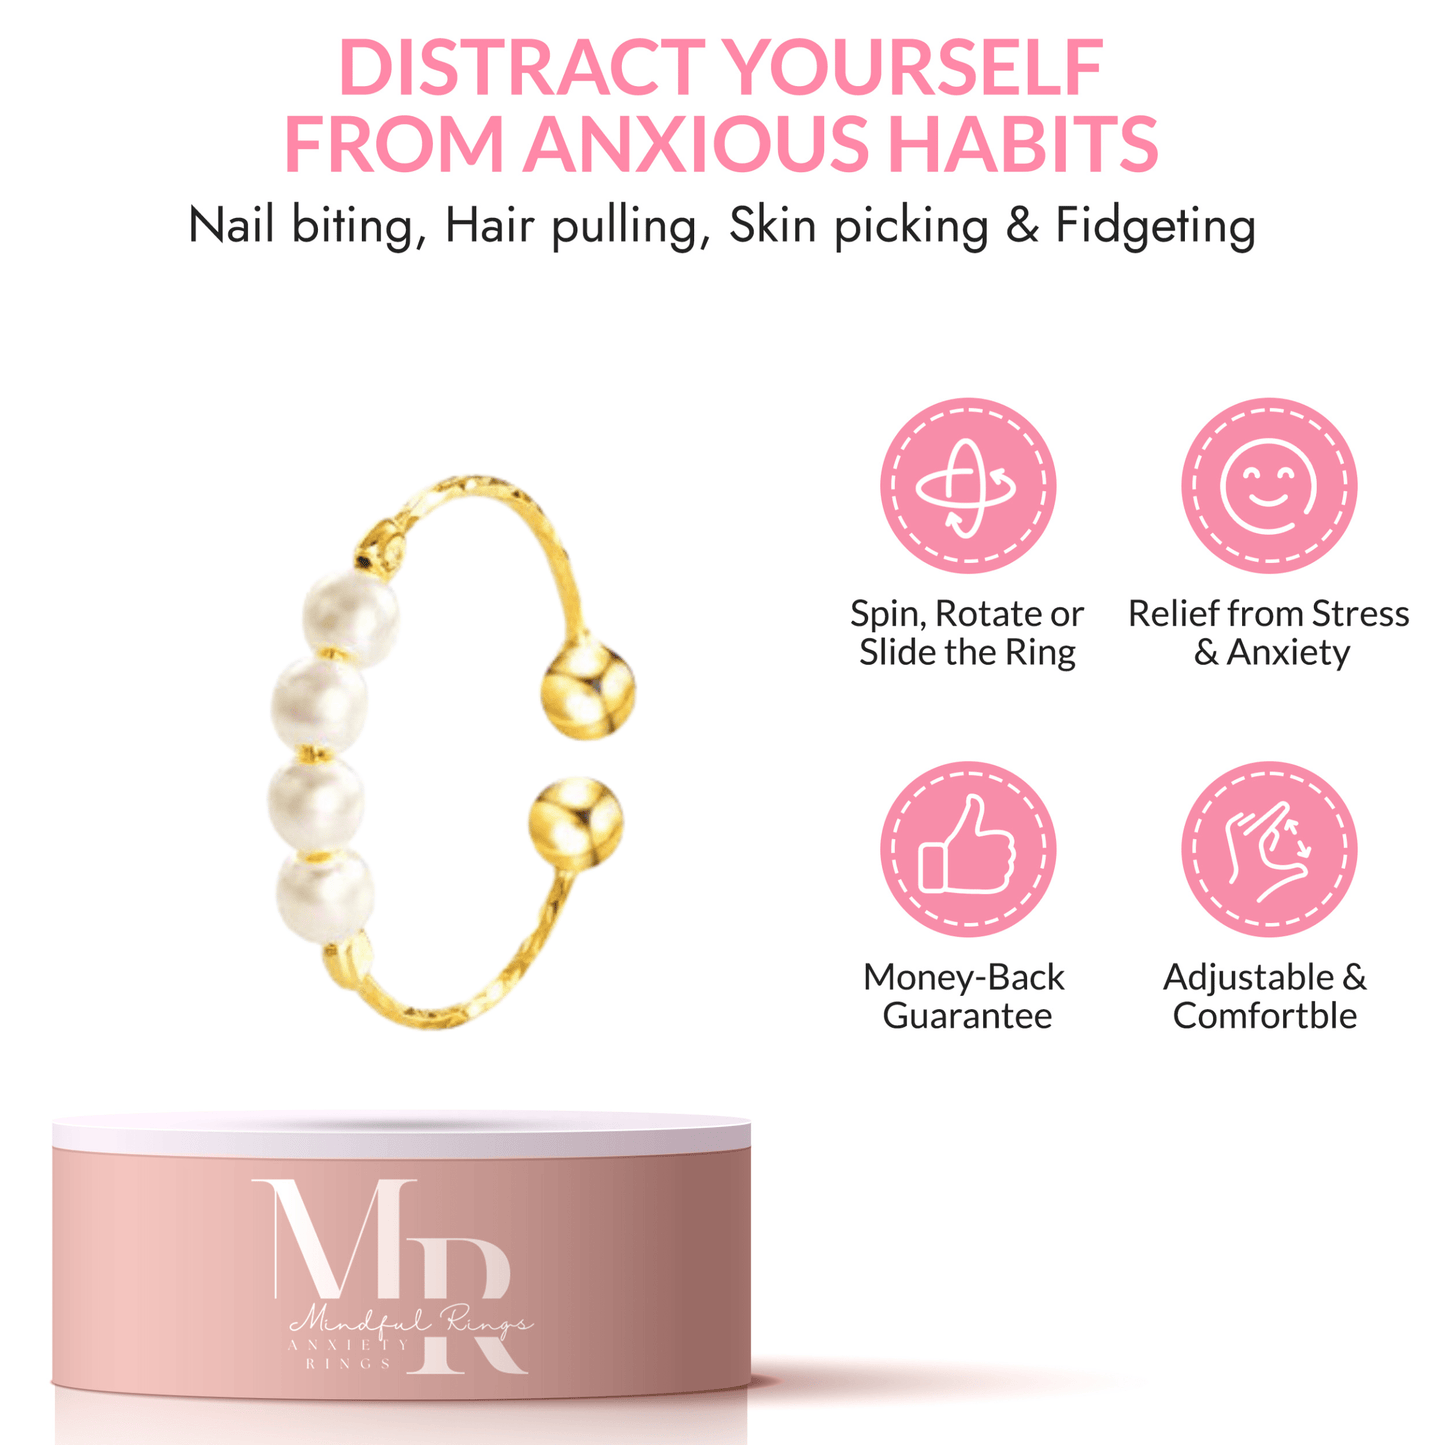 The Gold Plated - White Faux Pearl Fidget Anxiety Ring